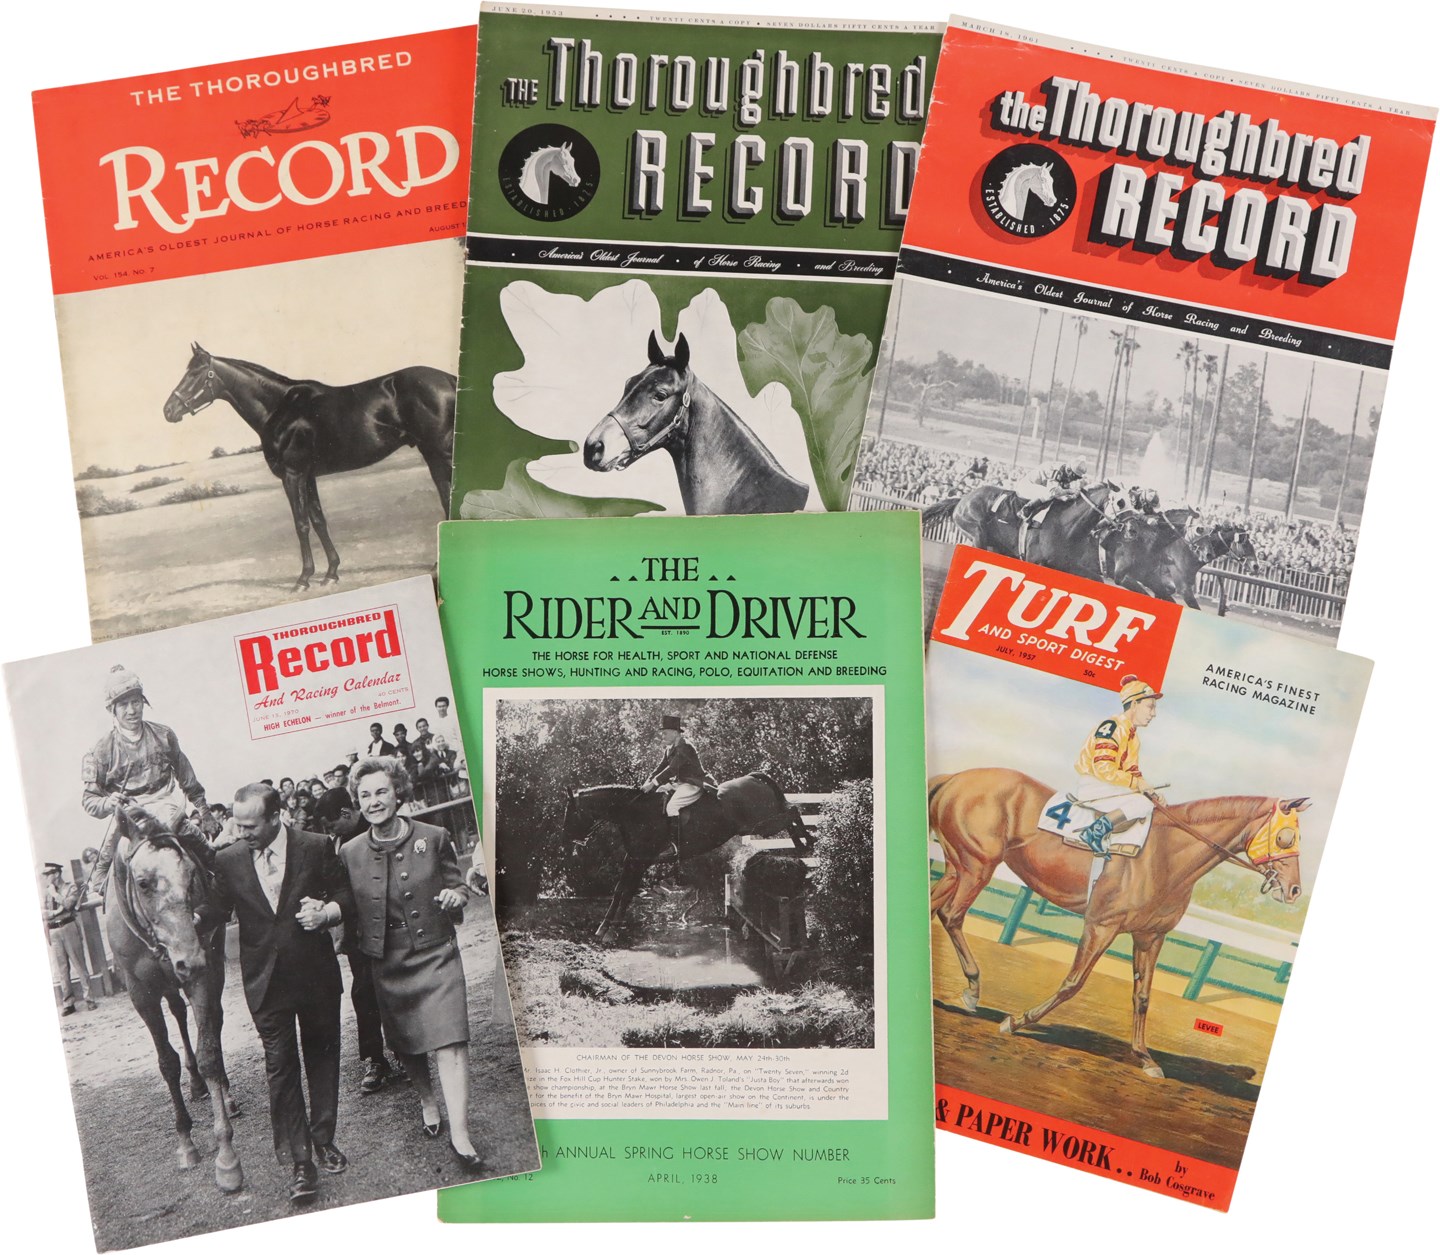 Horse Racing - Magazines, Journals, Books, Etc., Featuring Articles and Photos of Important Racehorses, Races, Racetracks, and Jockeys of a Bygone Era (21)